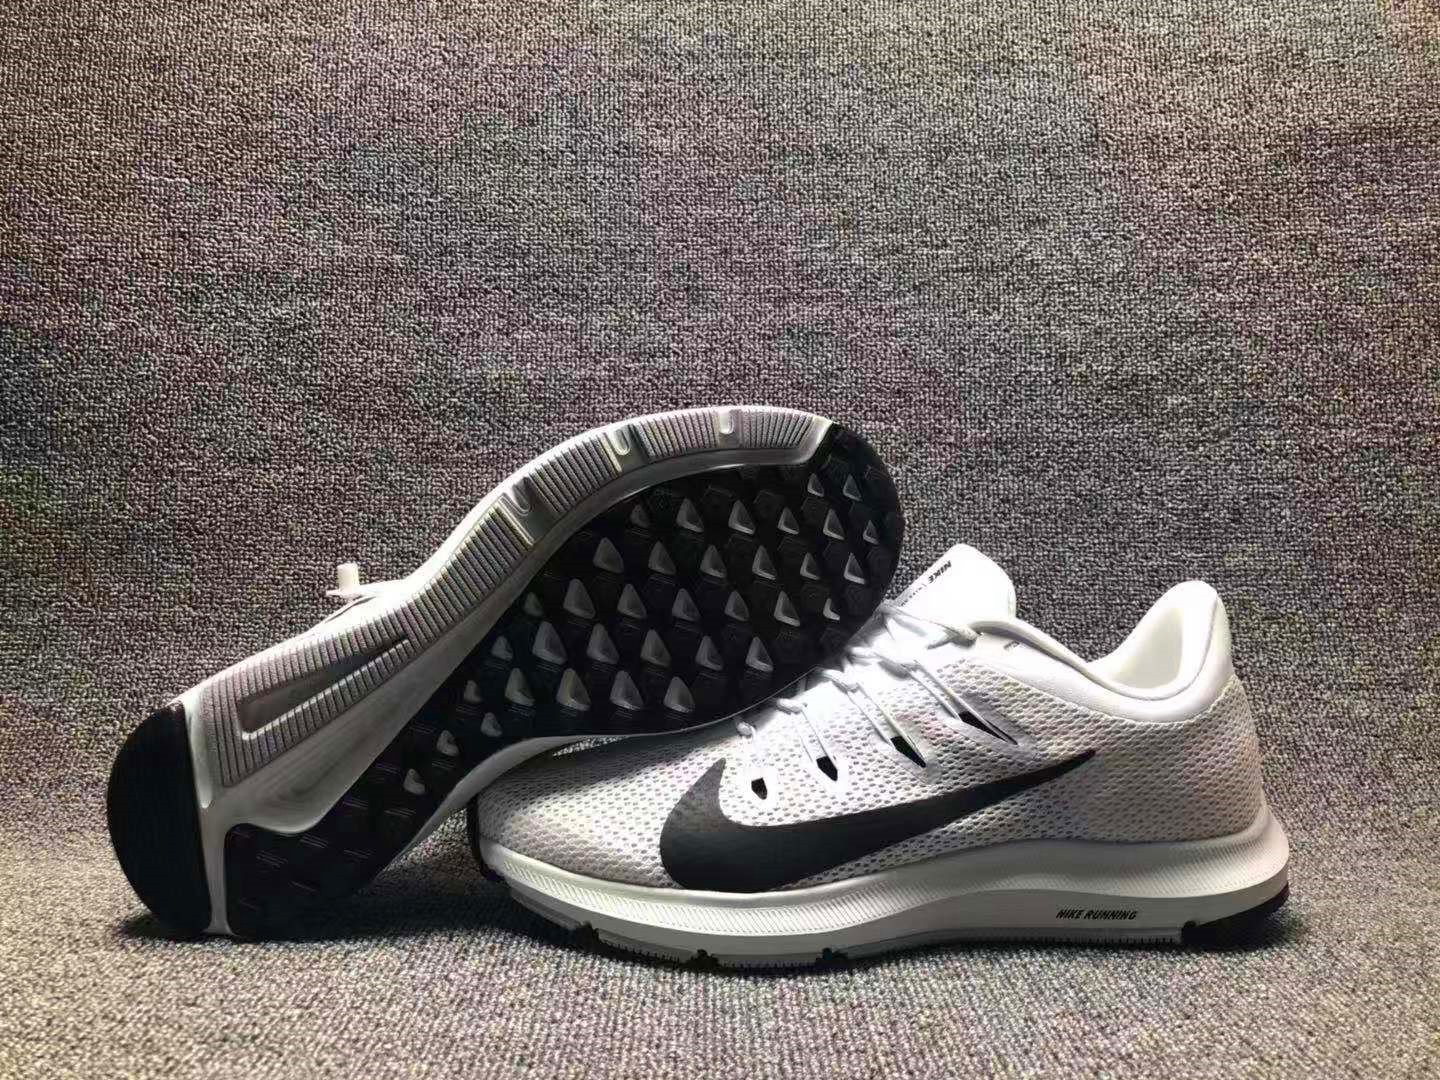 Nike Quest II White Black Running Shoes